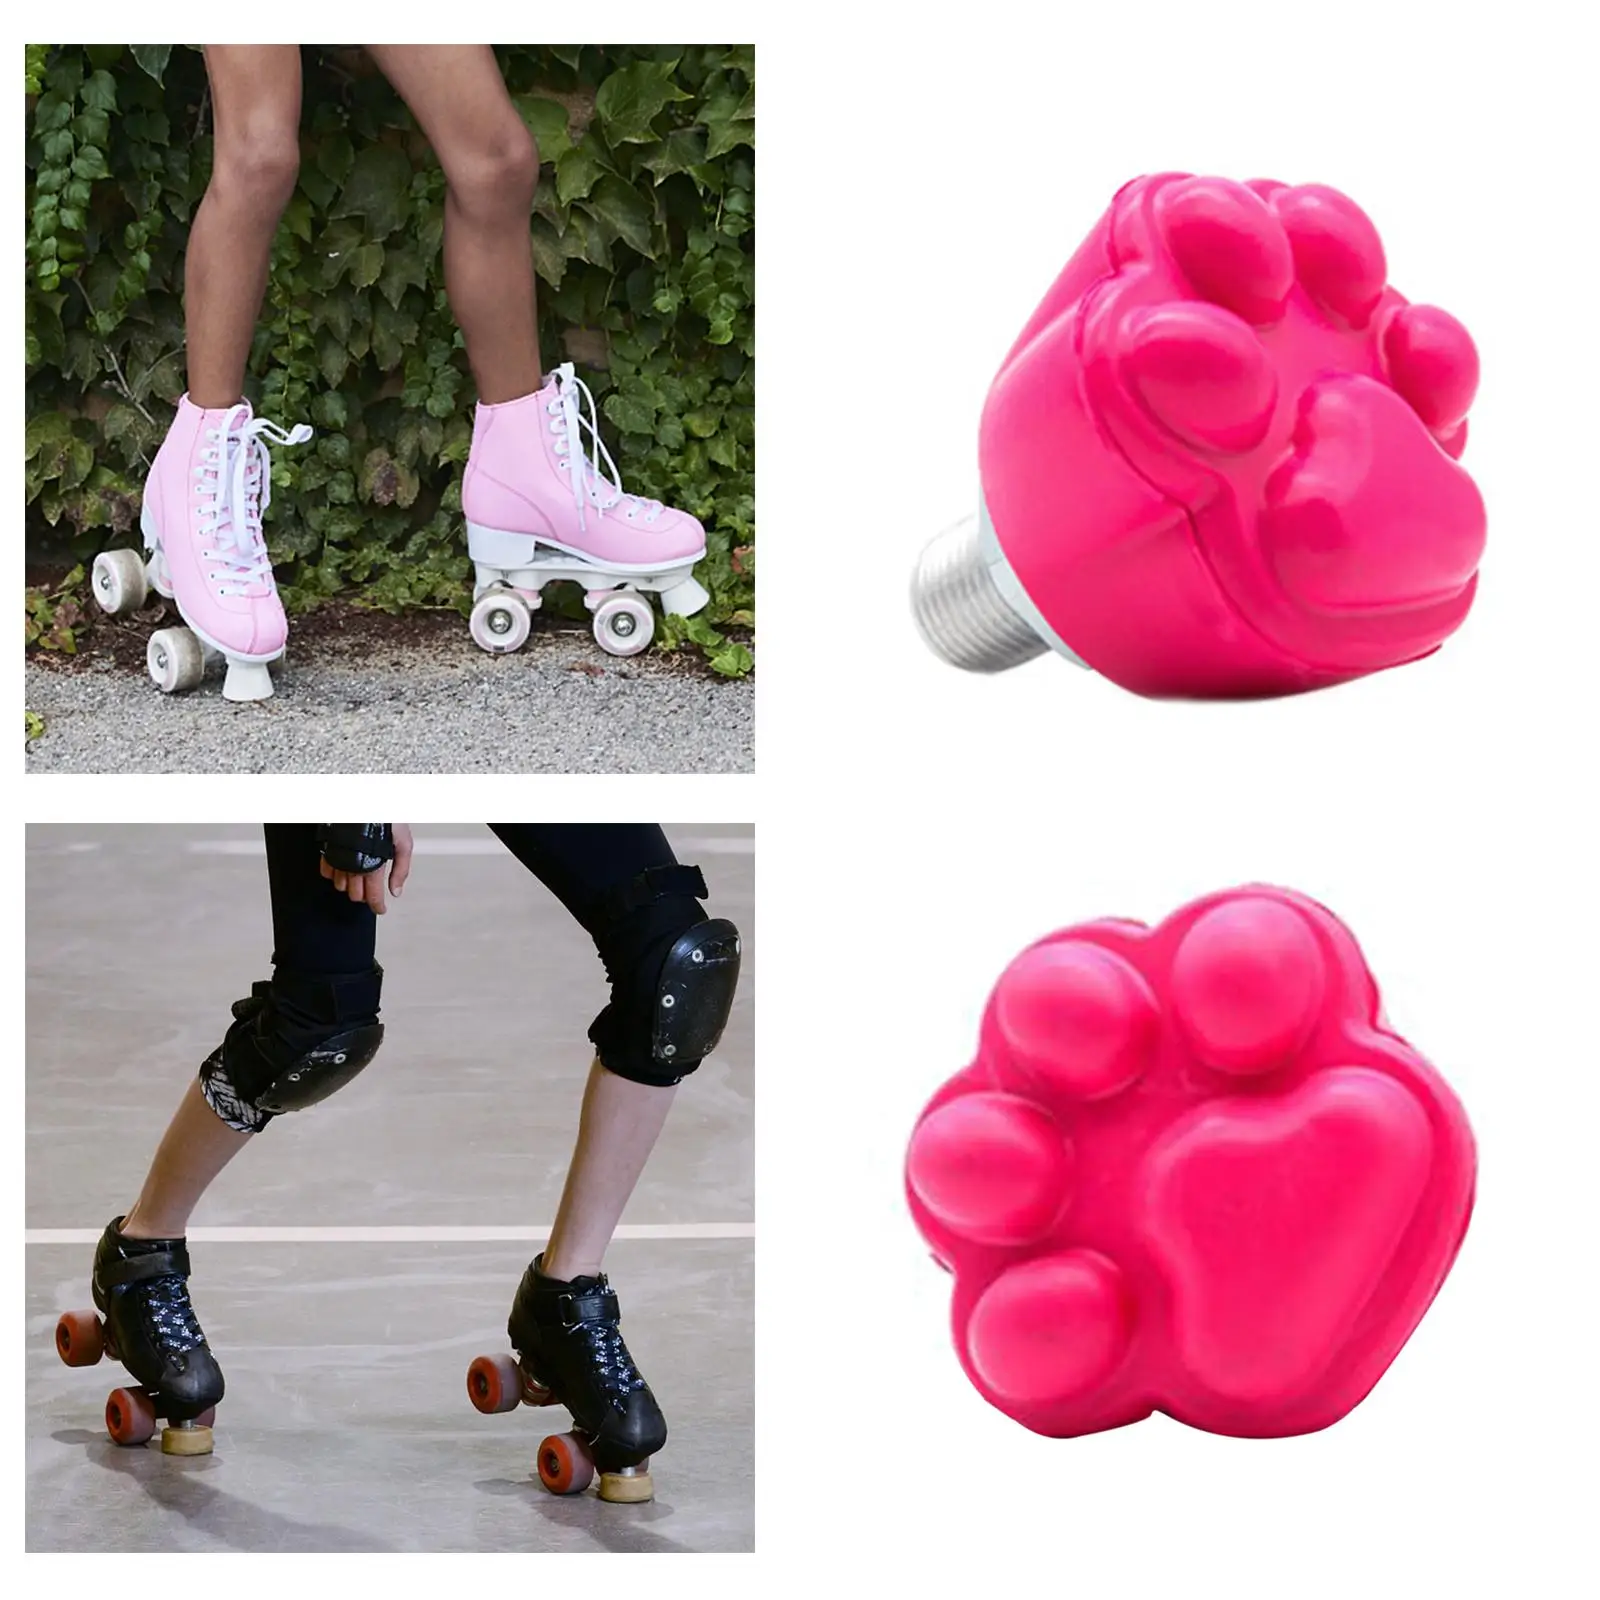 Cat Paw Roller Skates Toe Stops Plugs Rubber Brake Block Stoppers Toe Stops Replacement Skate Accessories 2